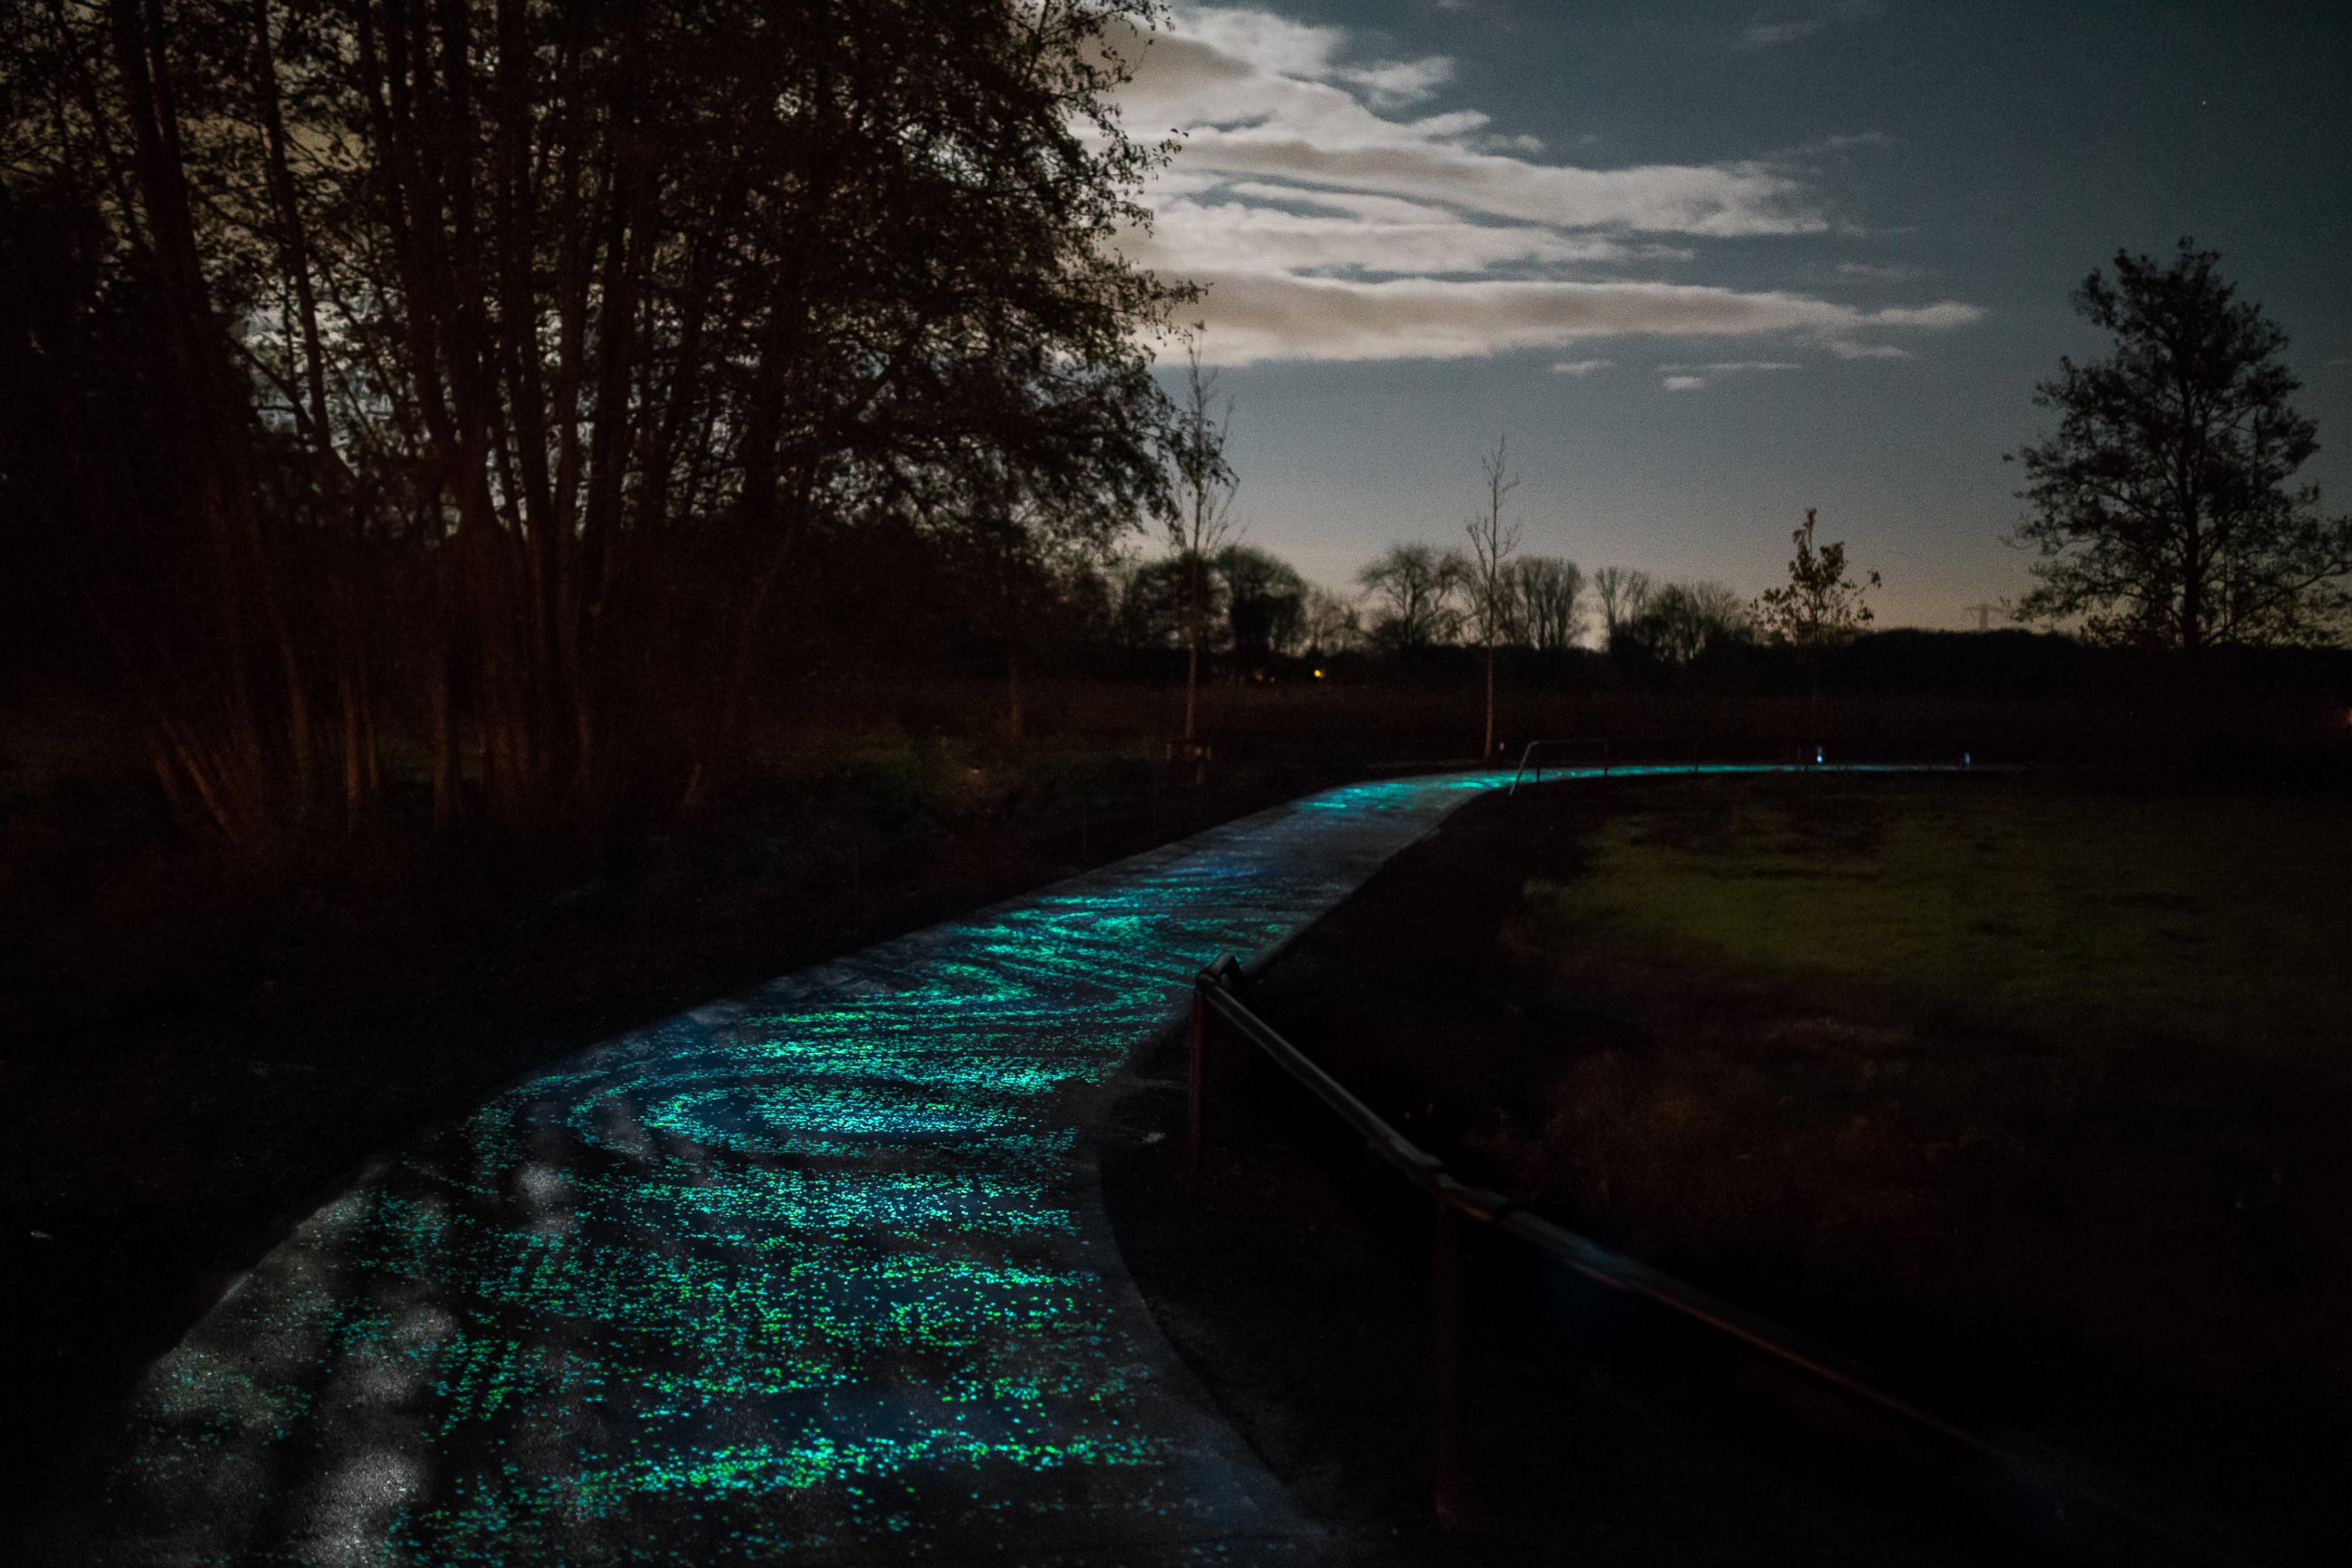 PHOTO: Artist Daan Roosegaarde's design studio in the Netherlands has made the first glow-in-the dark bike path, modeled after Van Gogh's Starry Night. 